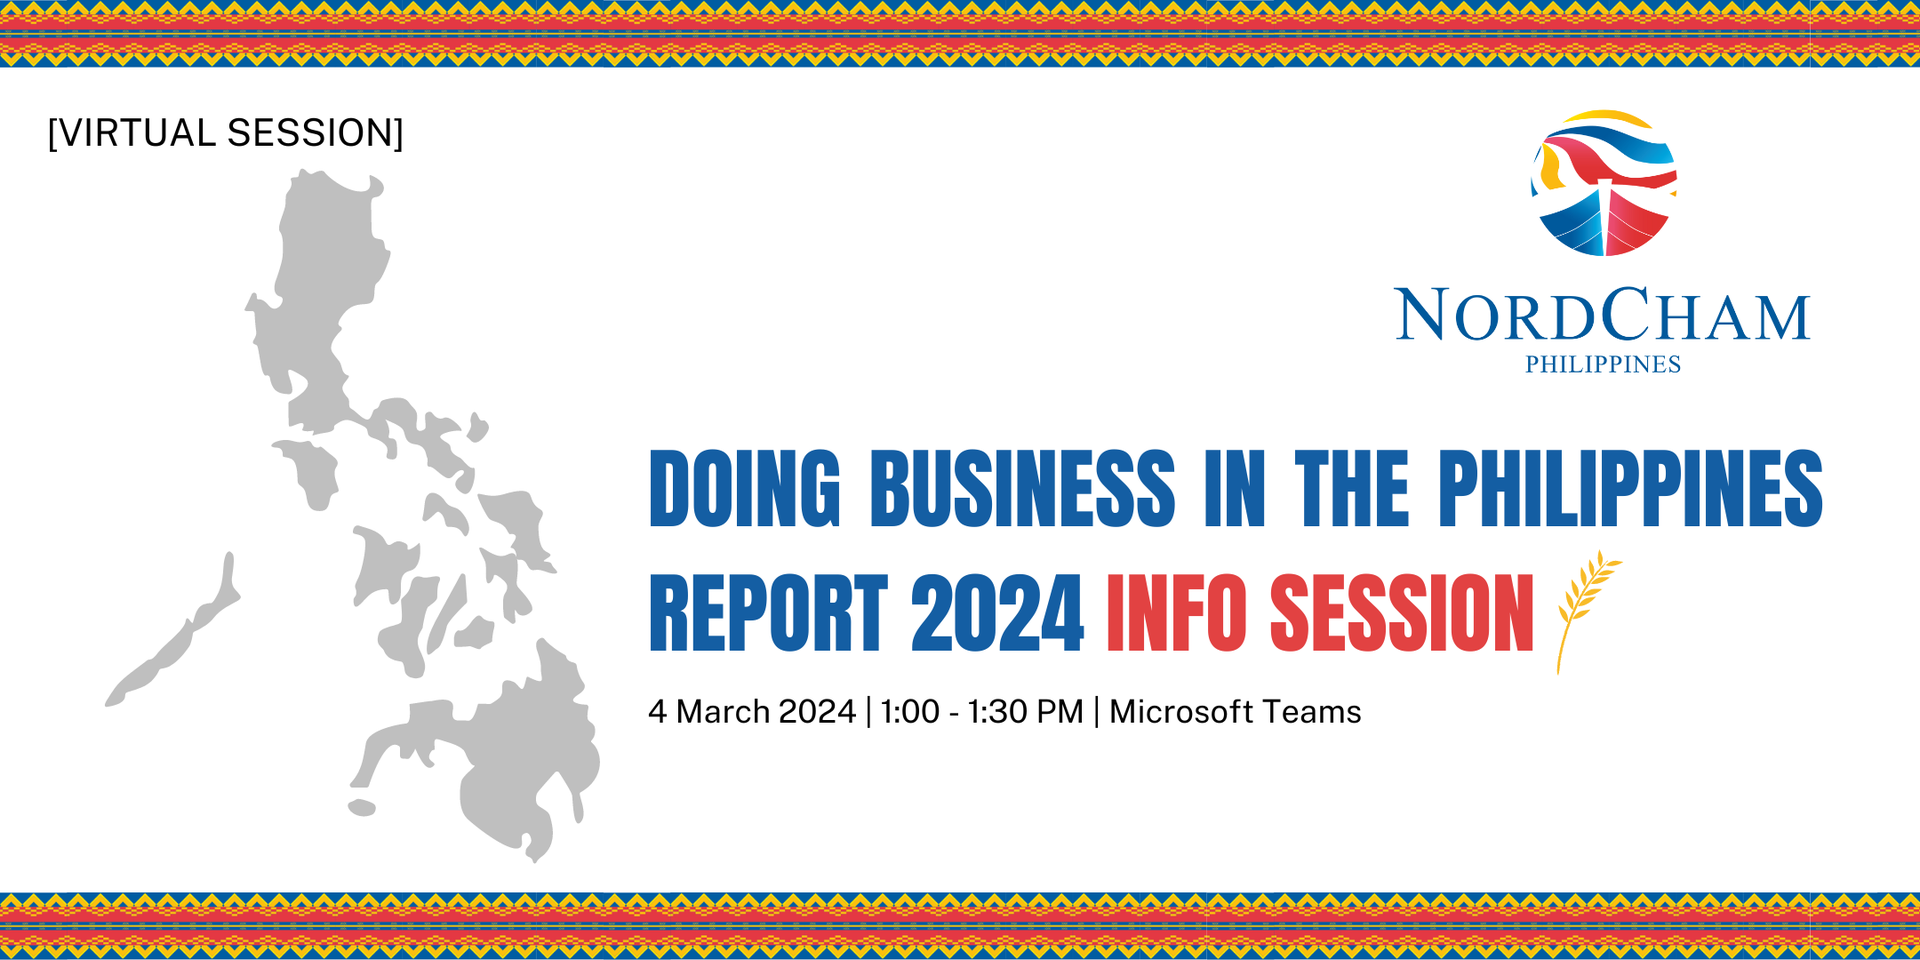 thumbnails INFO SESSION: NORDCHAM PHILIPPINES DOING BUSINESS IN THE PHILIPPINES REPORT 2024